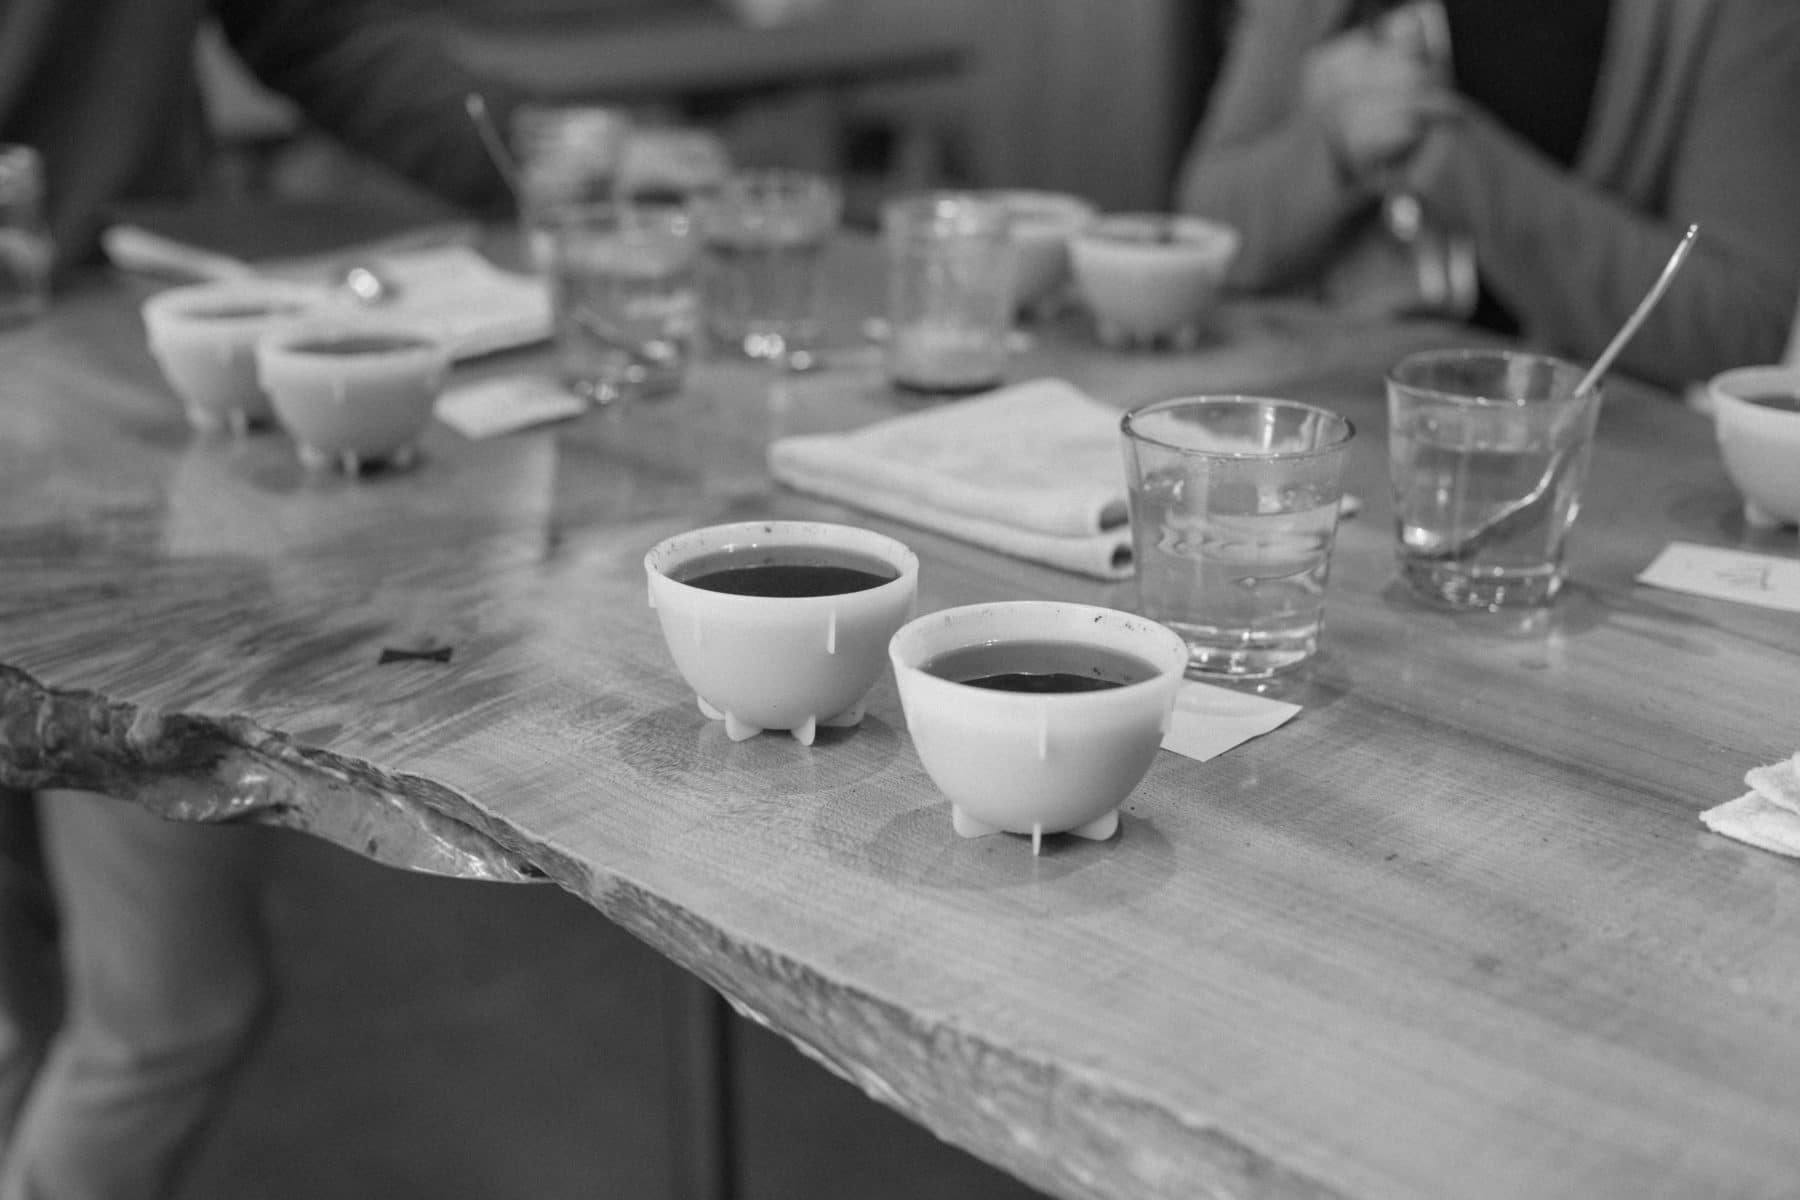 Cupping is a crucial step in our coffee sourcing to verify the quality and integrity of each selection.